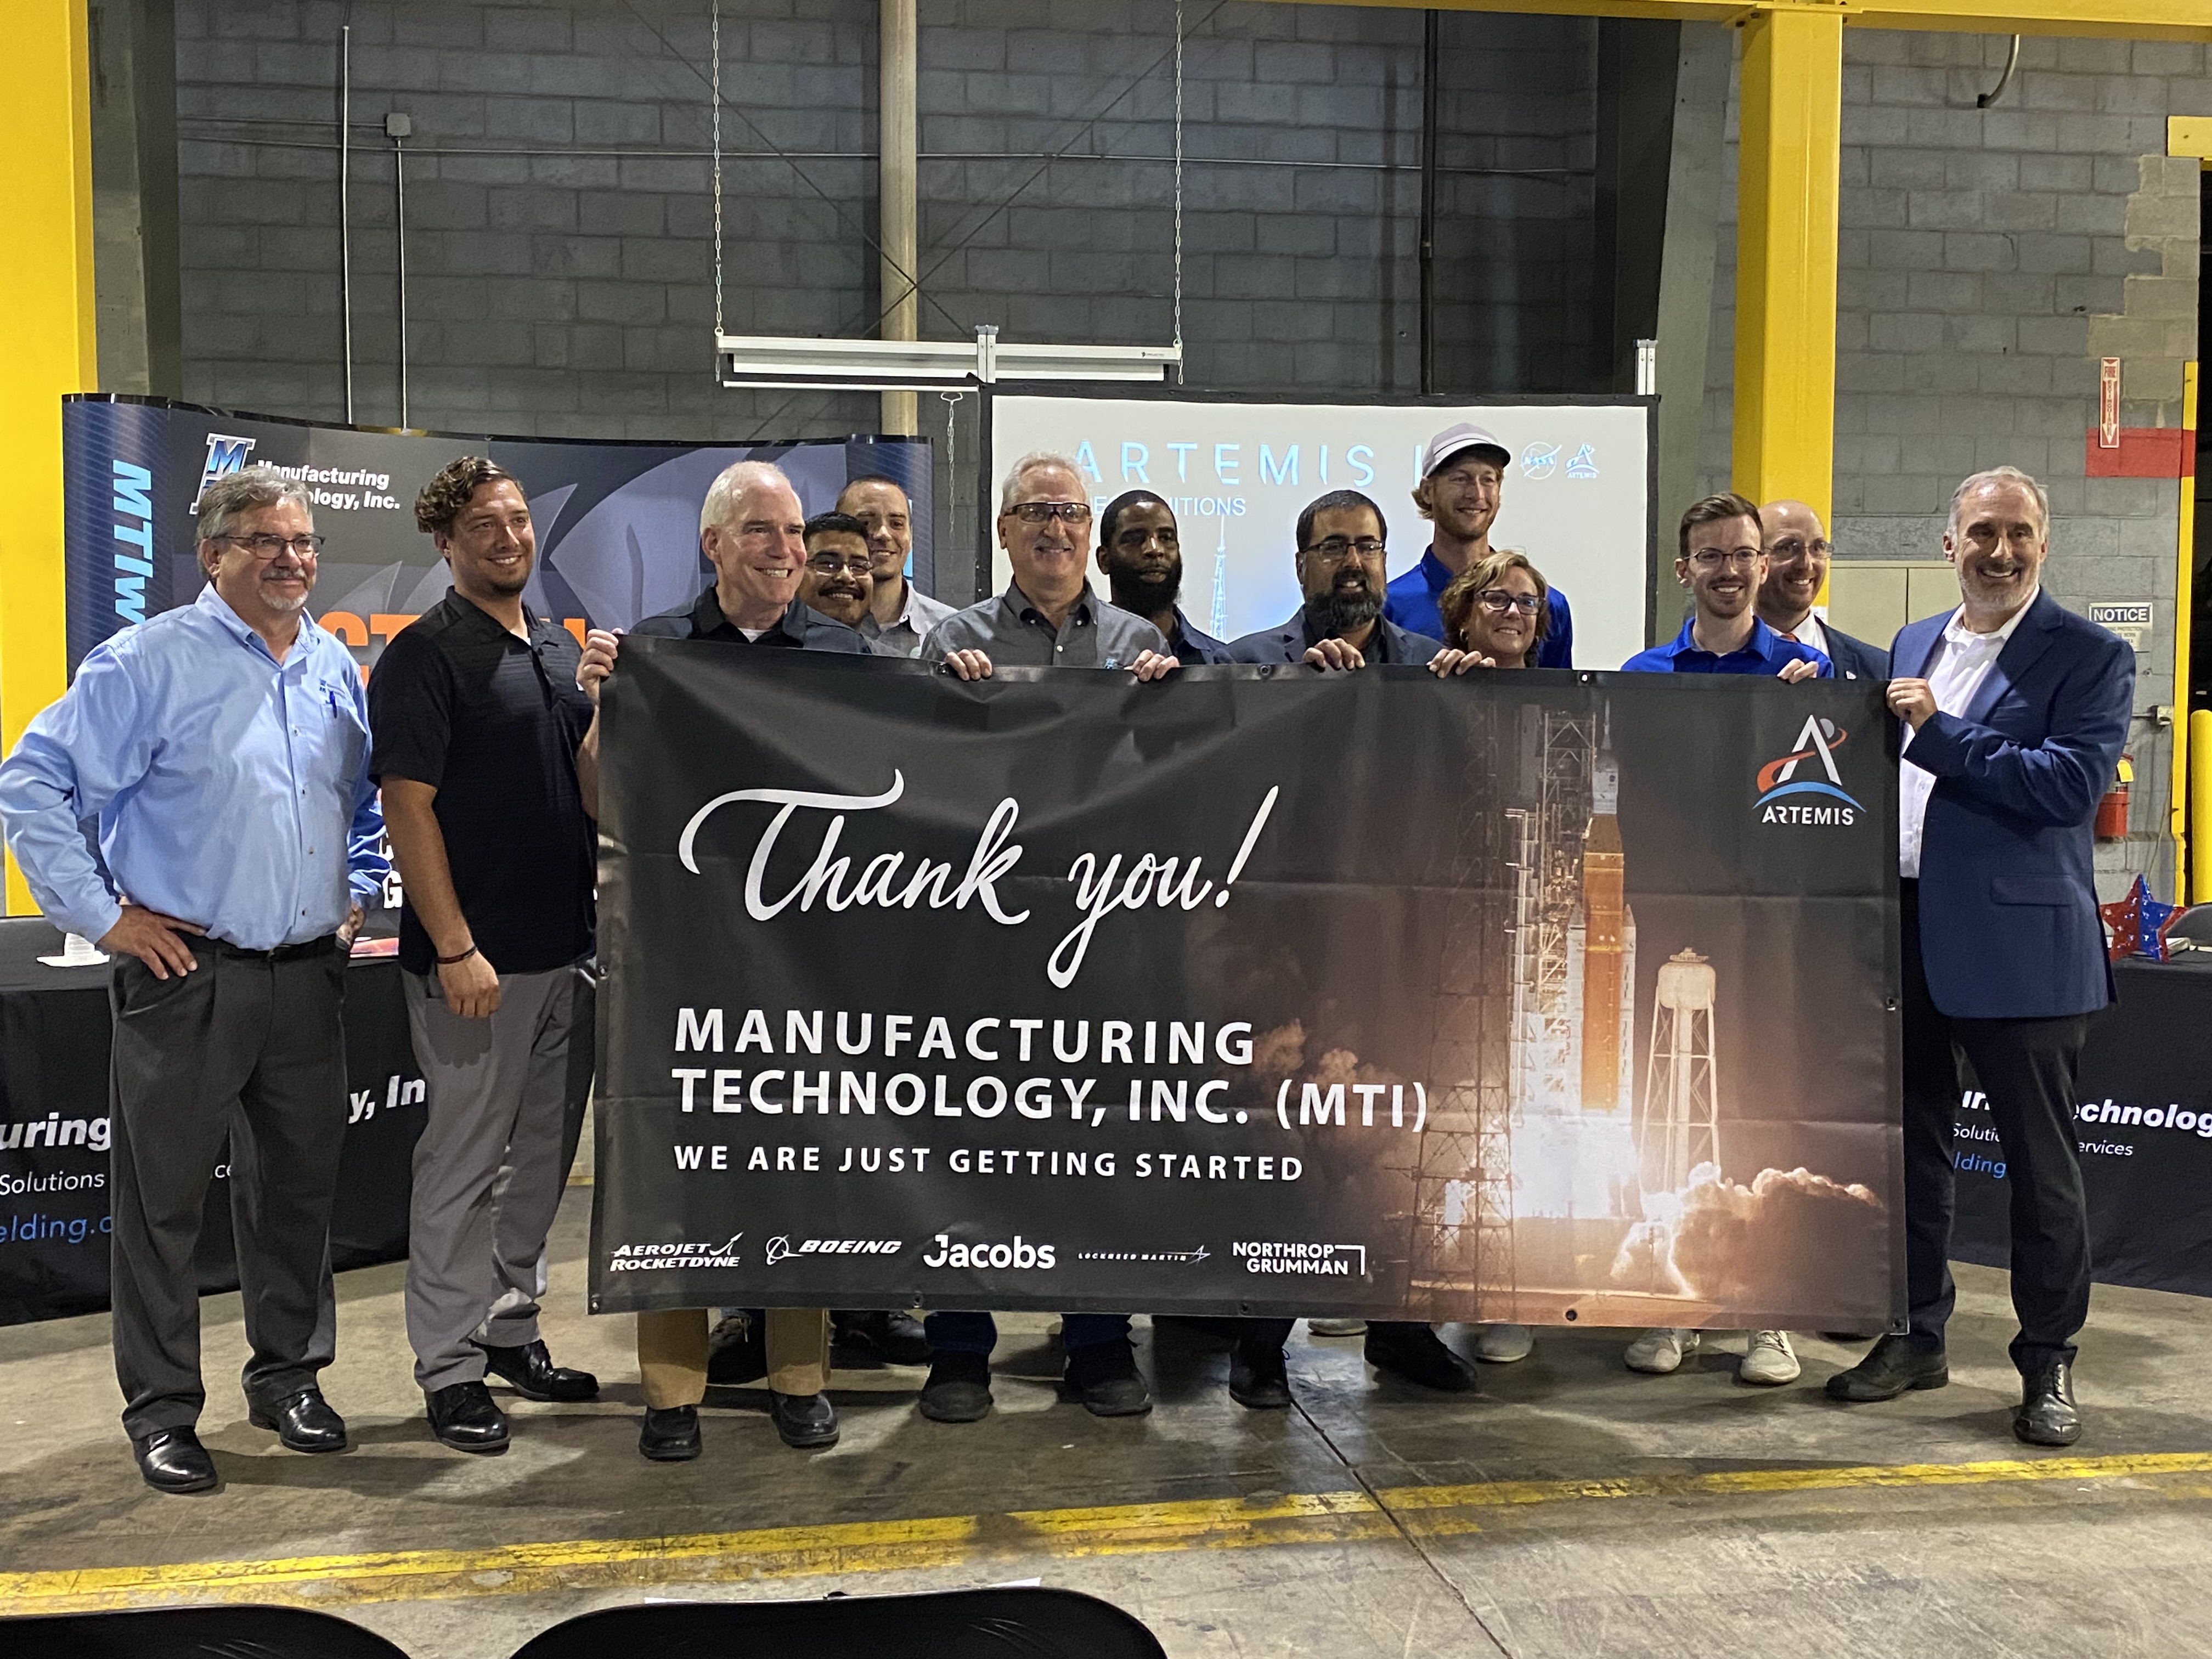 NASA & Aerojet Rocketdyne Recognize MTI's Contributions to the Artemis I Space Mission